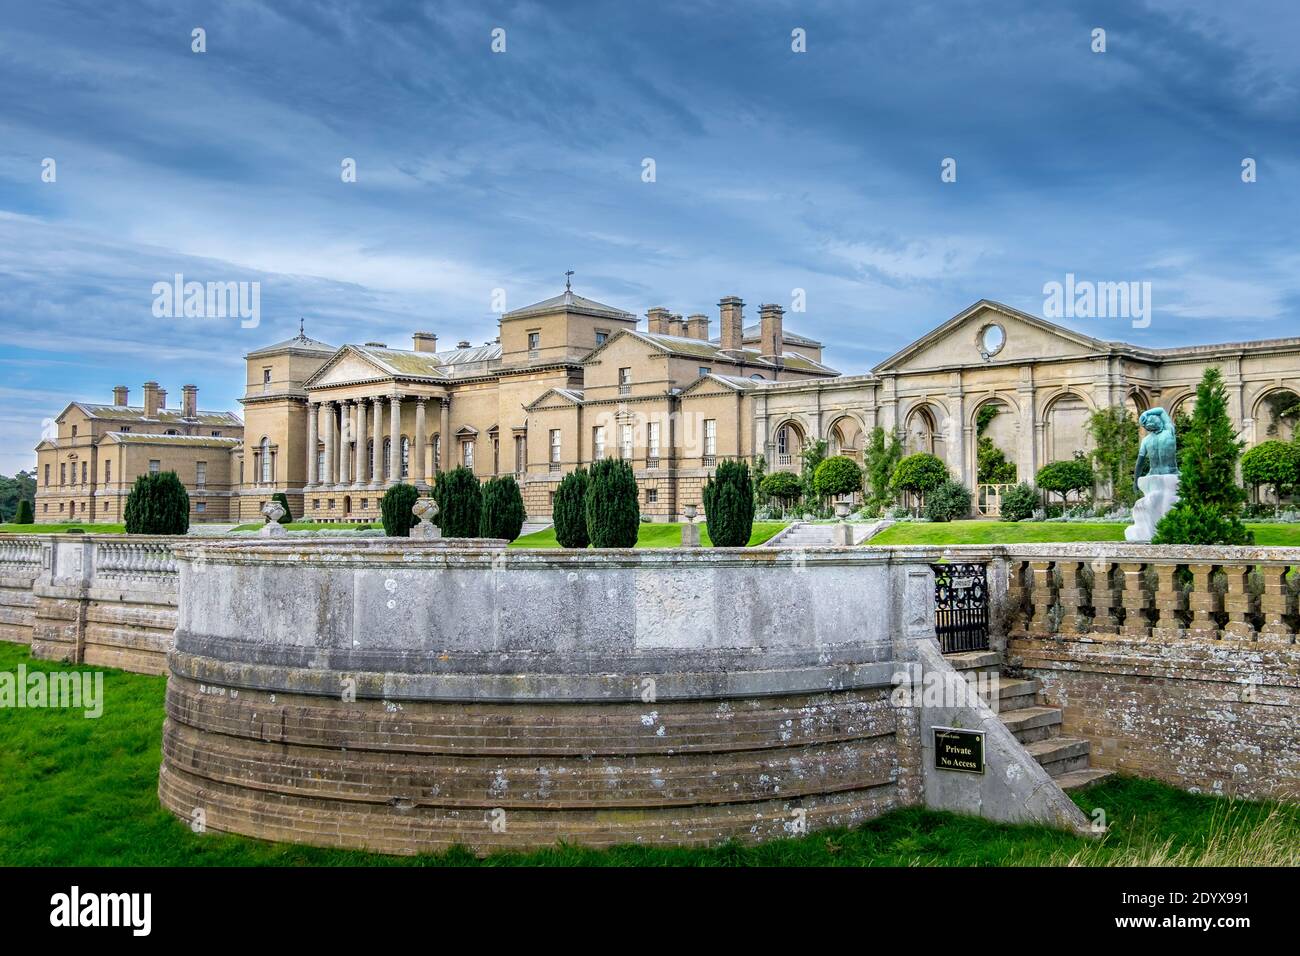 Holkham Hall is an 18th-century country house. Stock Photo